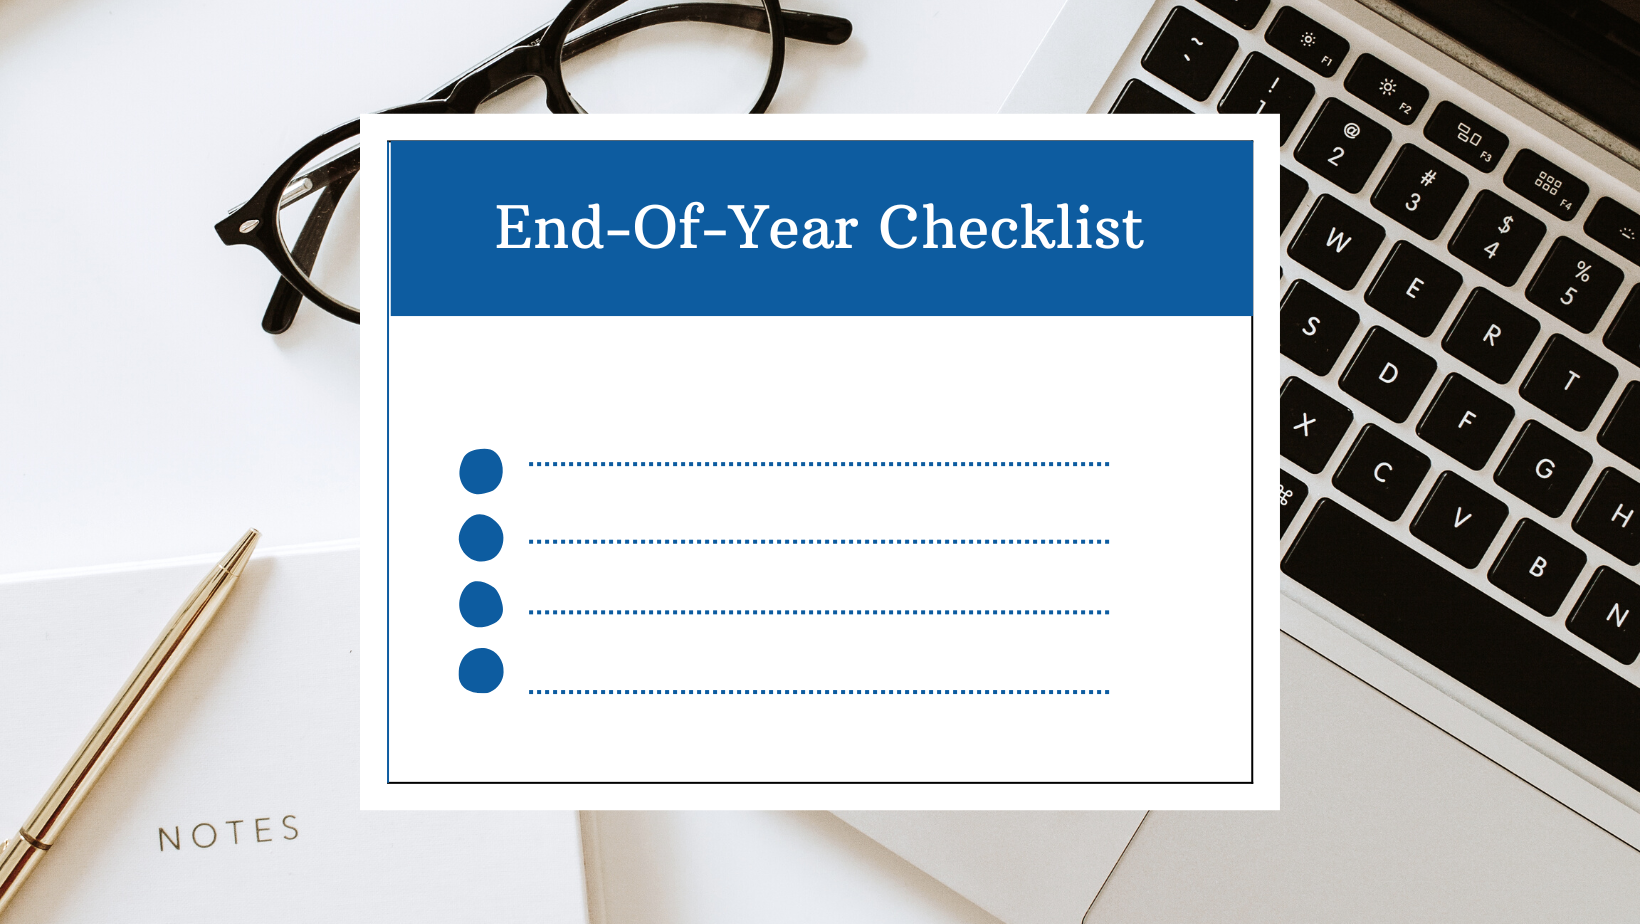 create an end of year checklist to close out the year strong!